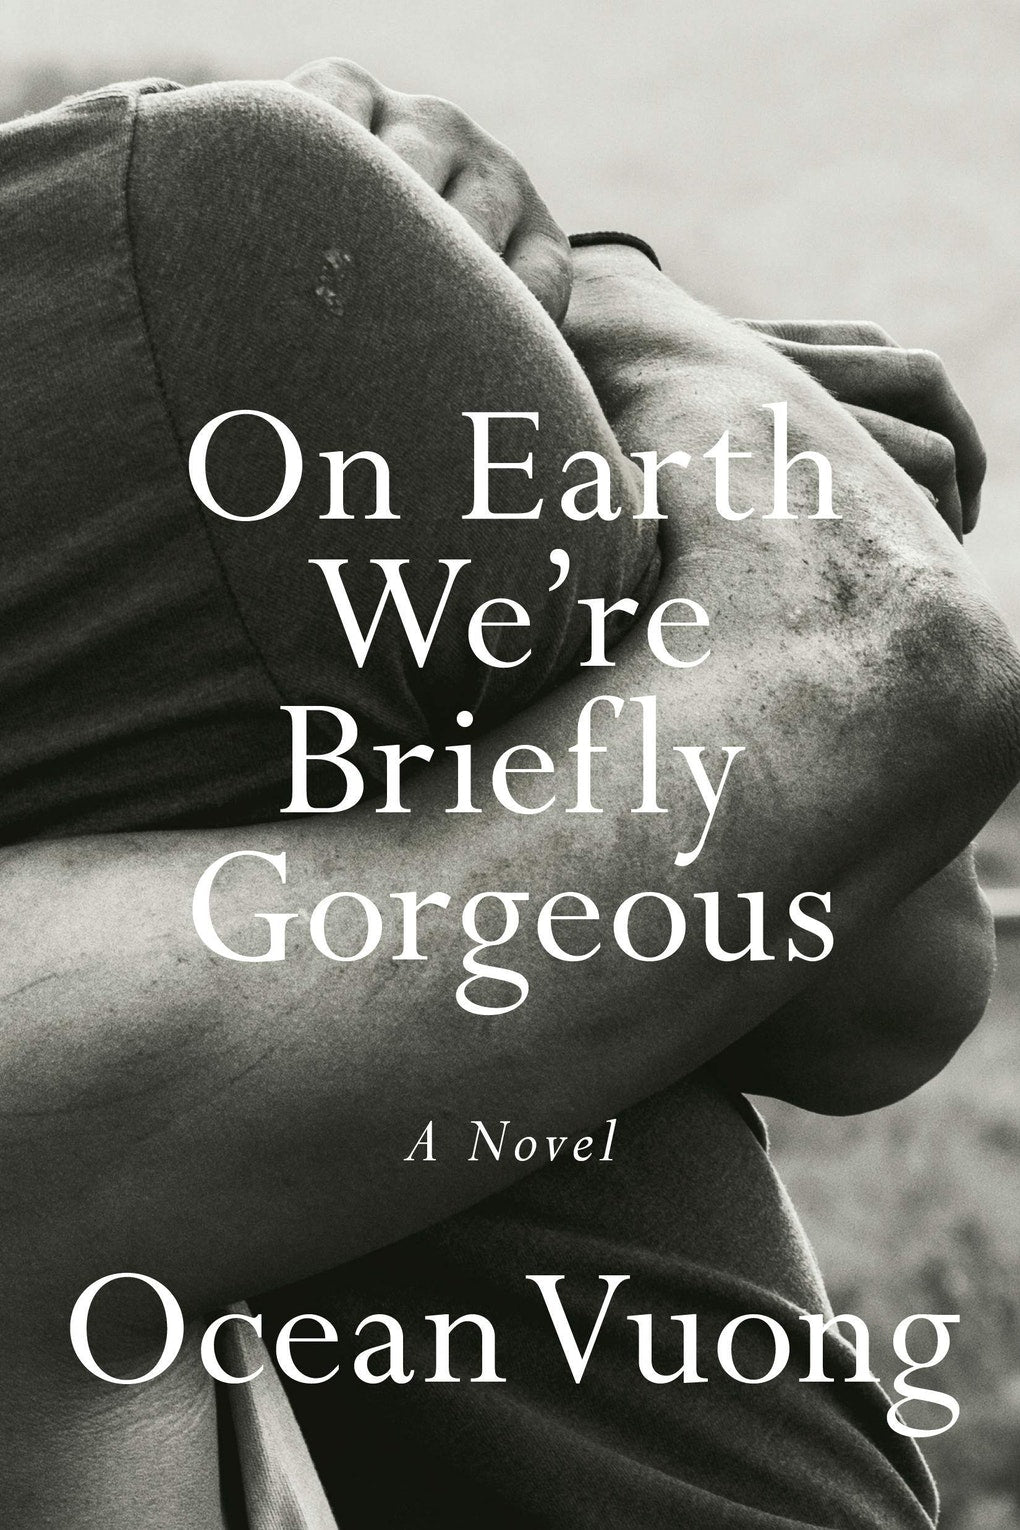 On Earth We're Briefly Gorgeous by Ocean Vuong (paperback)